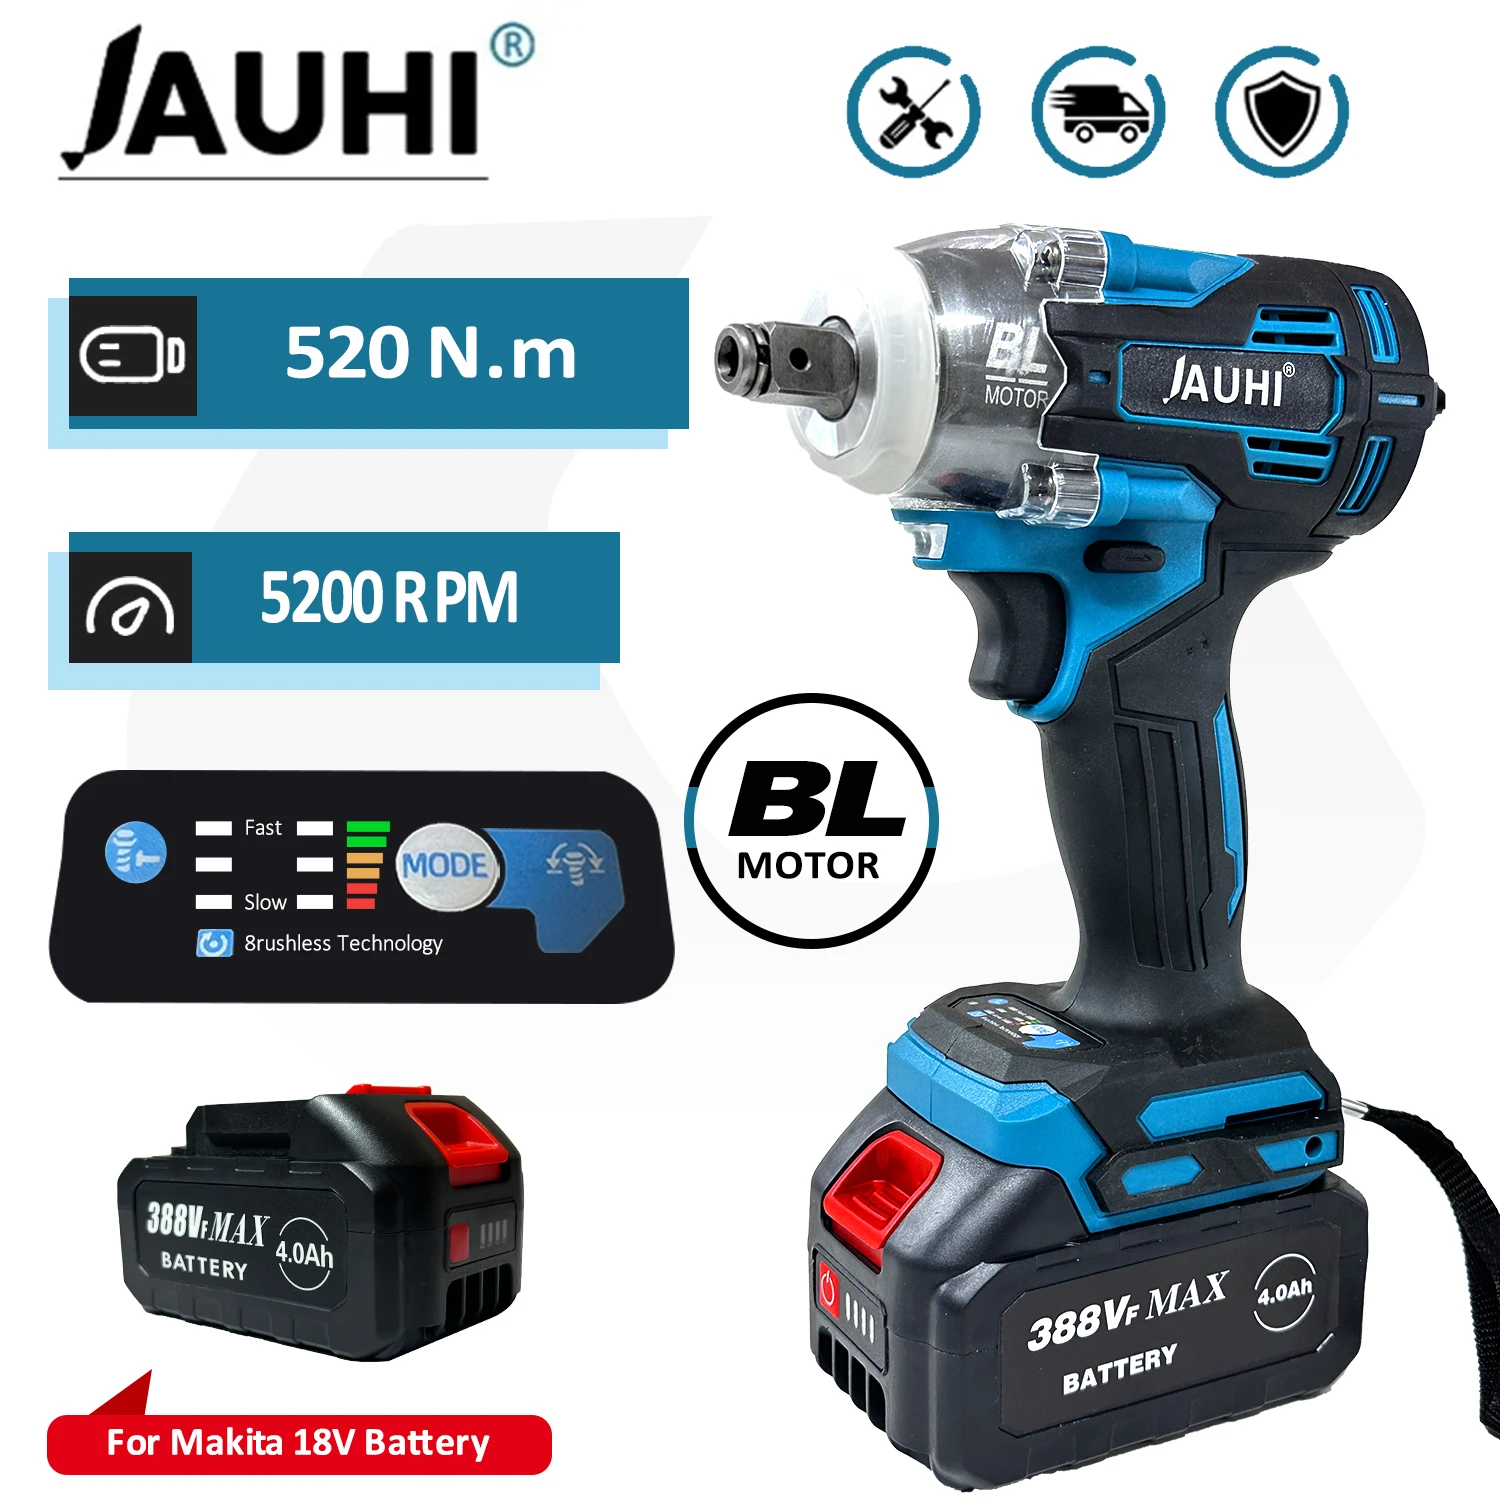 

JAUHI 388VF 520 N.M Torque Brushless Electric Impact Wrench 1/2 In With 20000mAh Lithium-Ion Battery For Makita 18V Battery